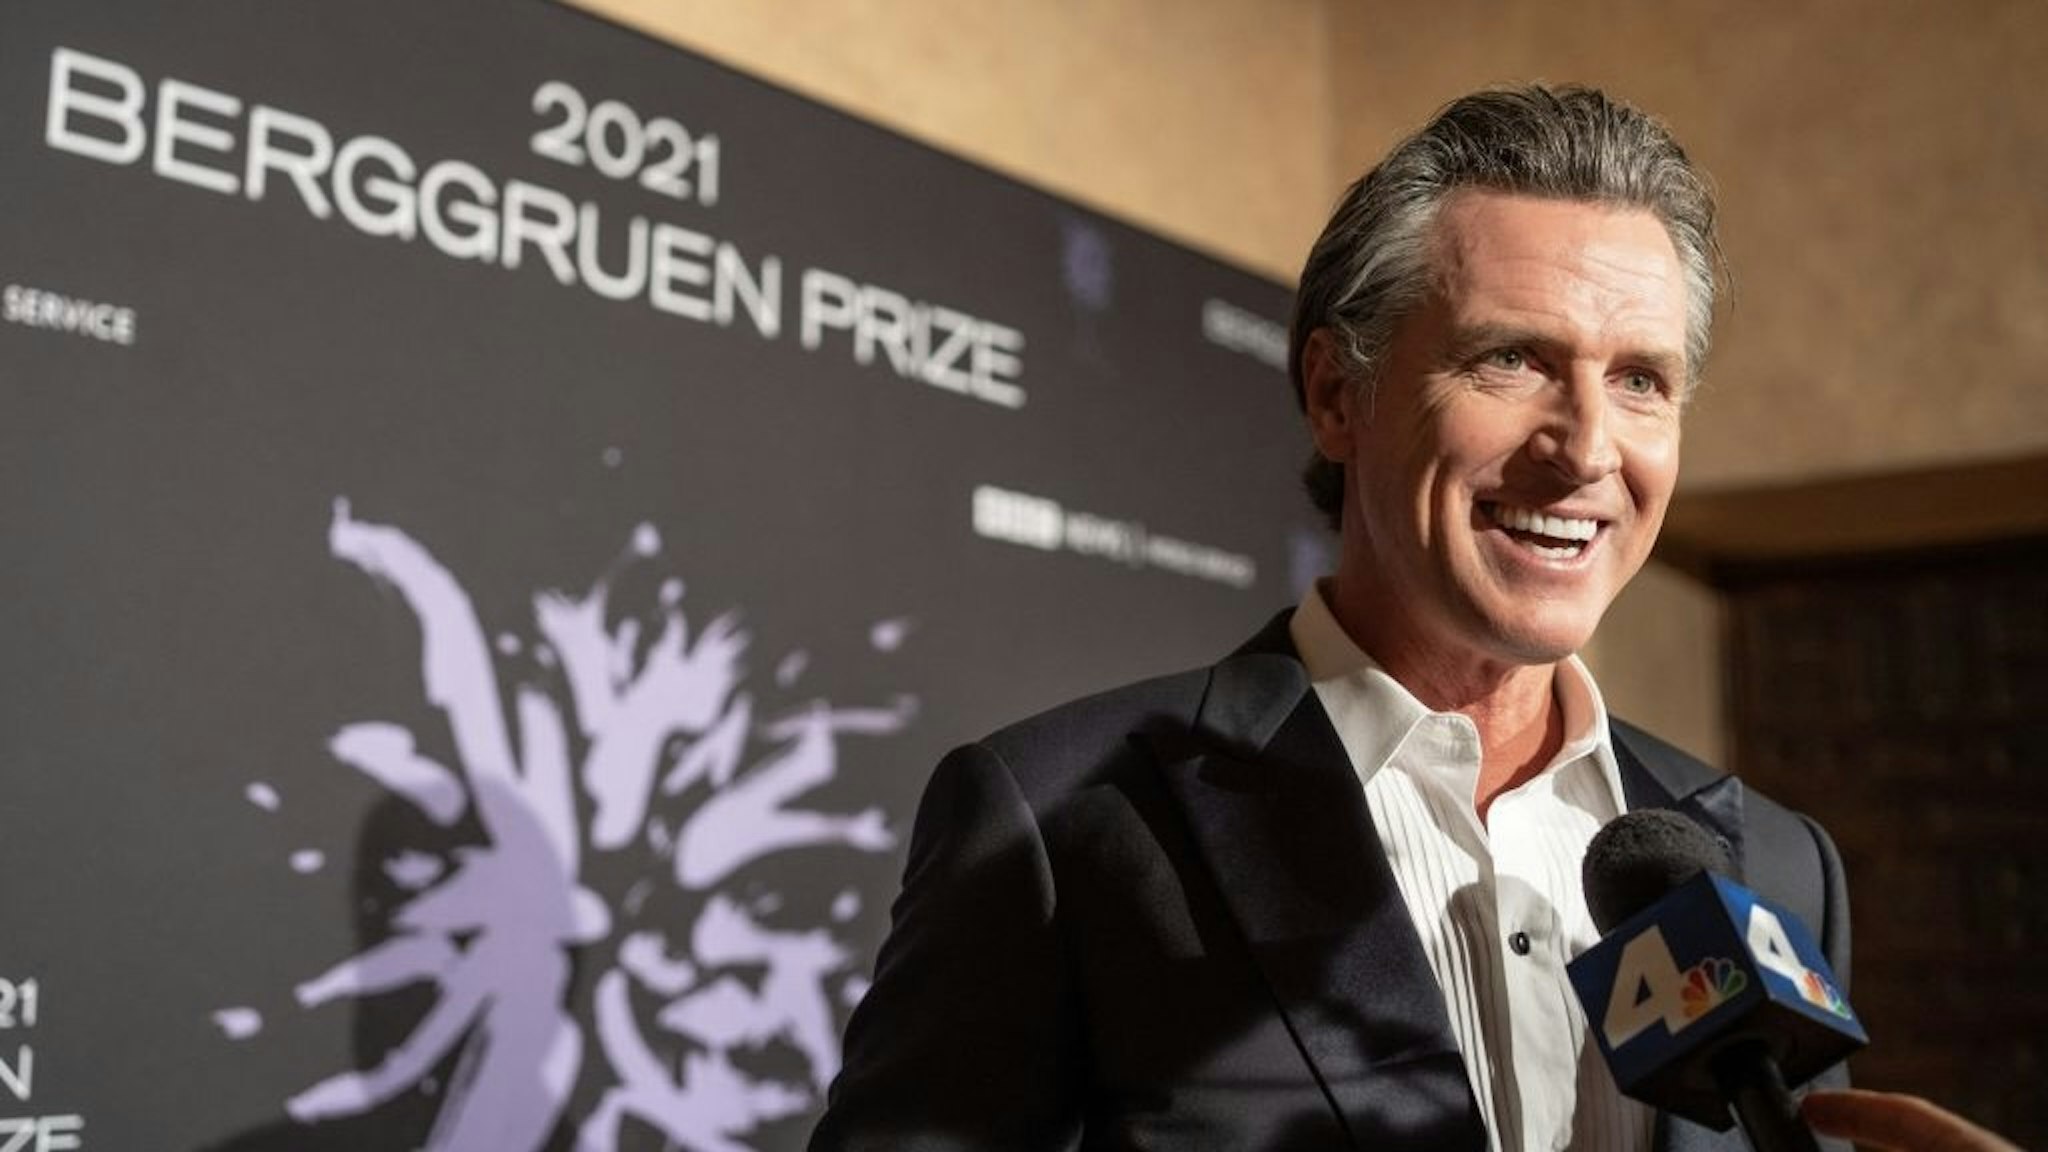 US-ENTERTAINMENT-CULTURE Governor of California Gavin Newsom attends the Berggruen Prize Gala at the Berggruen Hearst estate in Beverly Hills, California on May 4, 2022. (Photo by Morgan LIEBERMAN / AFP) (Photo by MORGAN LIEBERMAN/AFP via Getty Images) MORGAN LIEBERMAN / Contributor